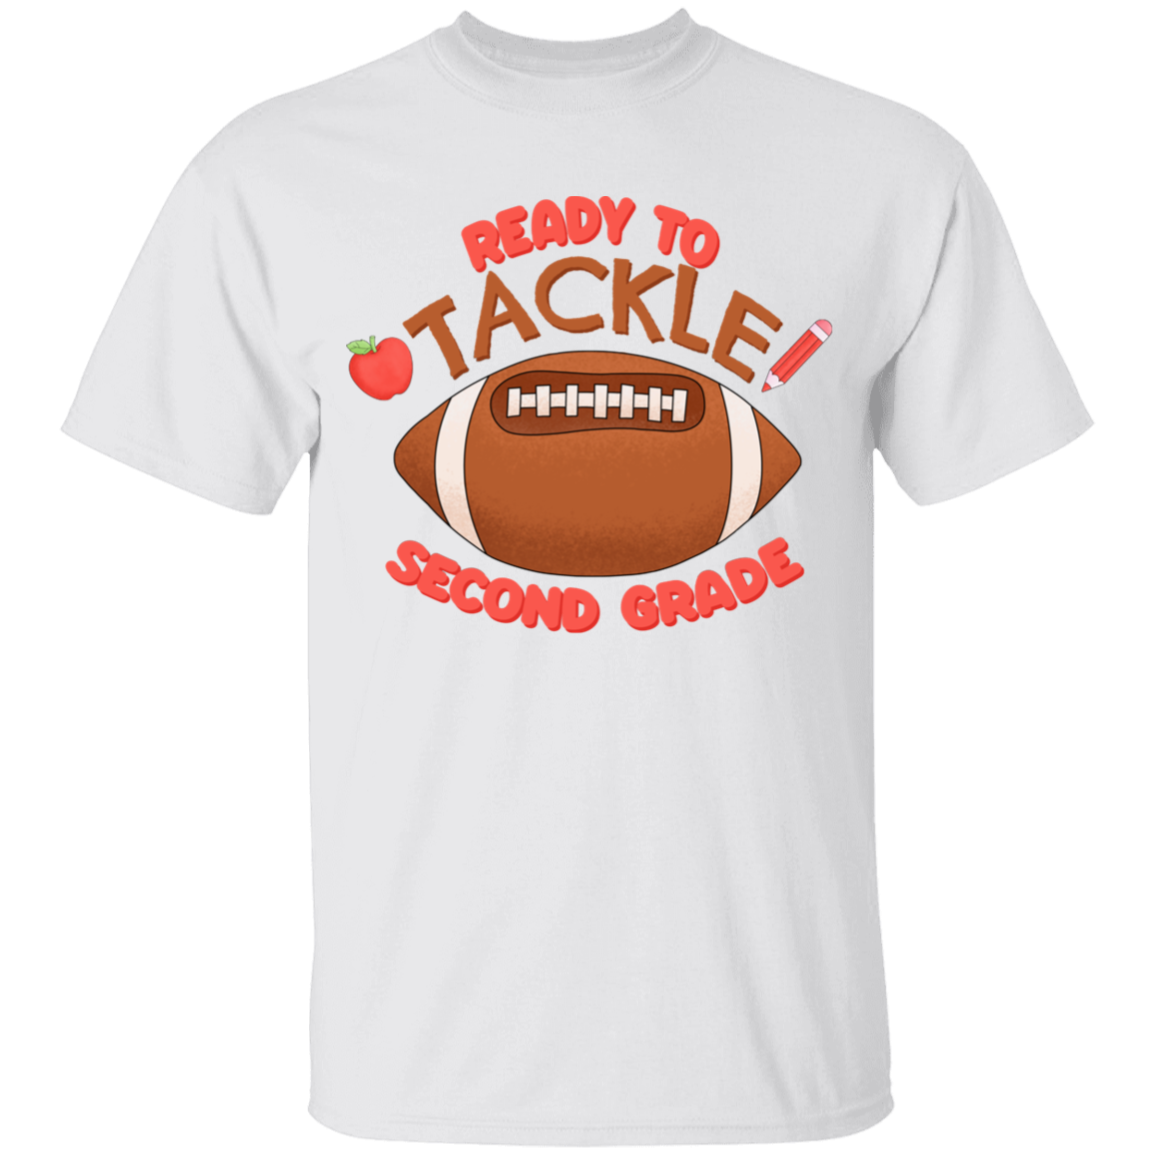 Ready to Tackle Second Grade Youth Cotton T-Shirt